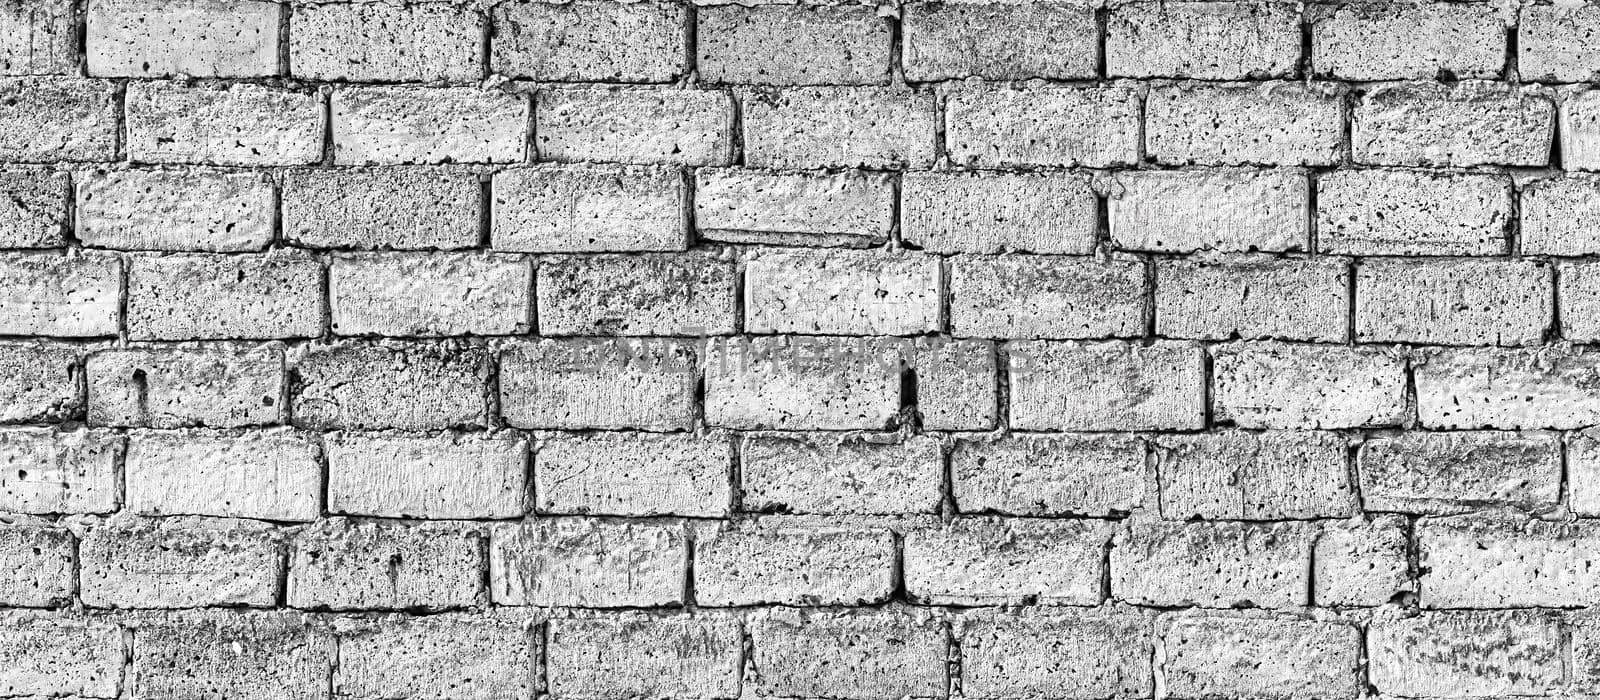 Wall texture from white old damaged bricks. Abstract background for design.